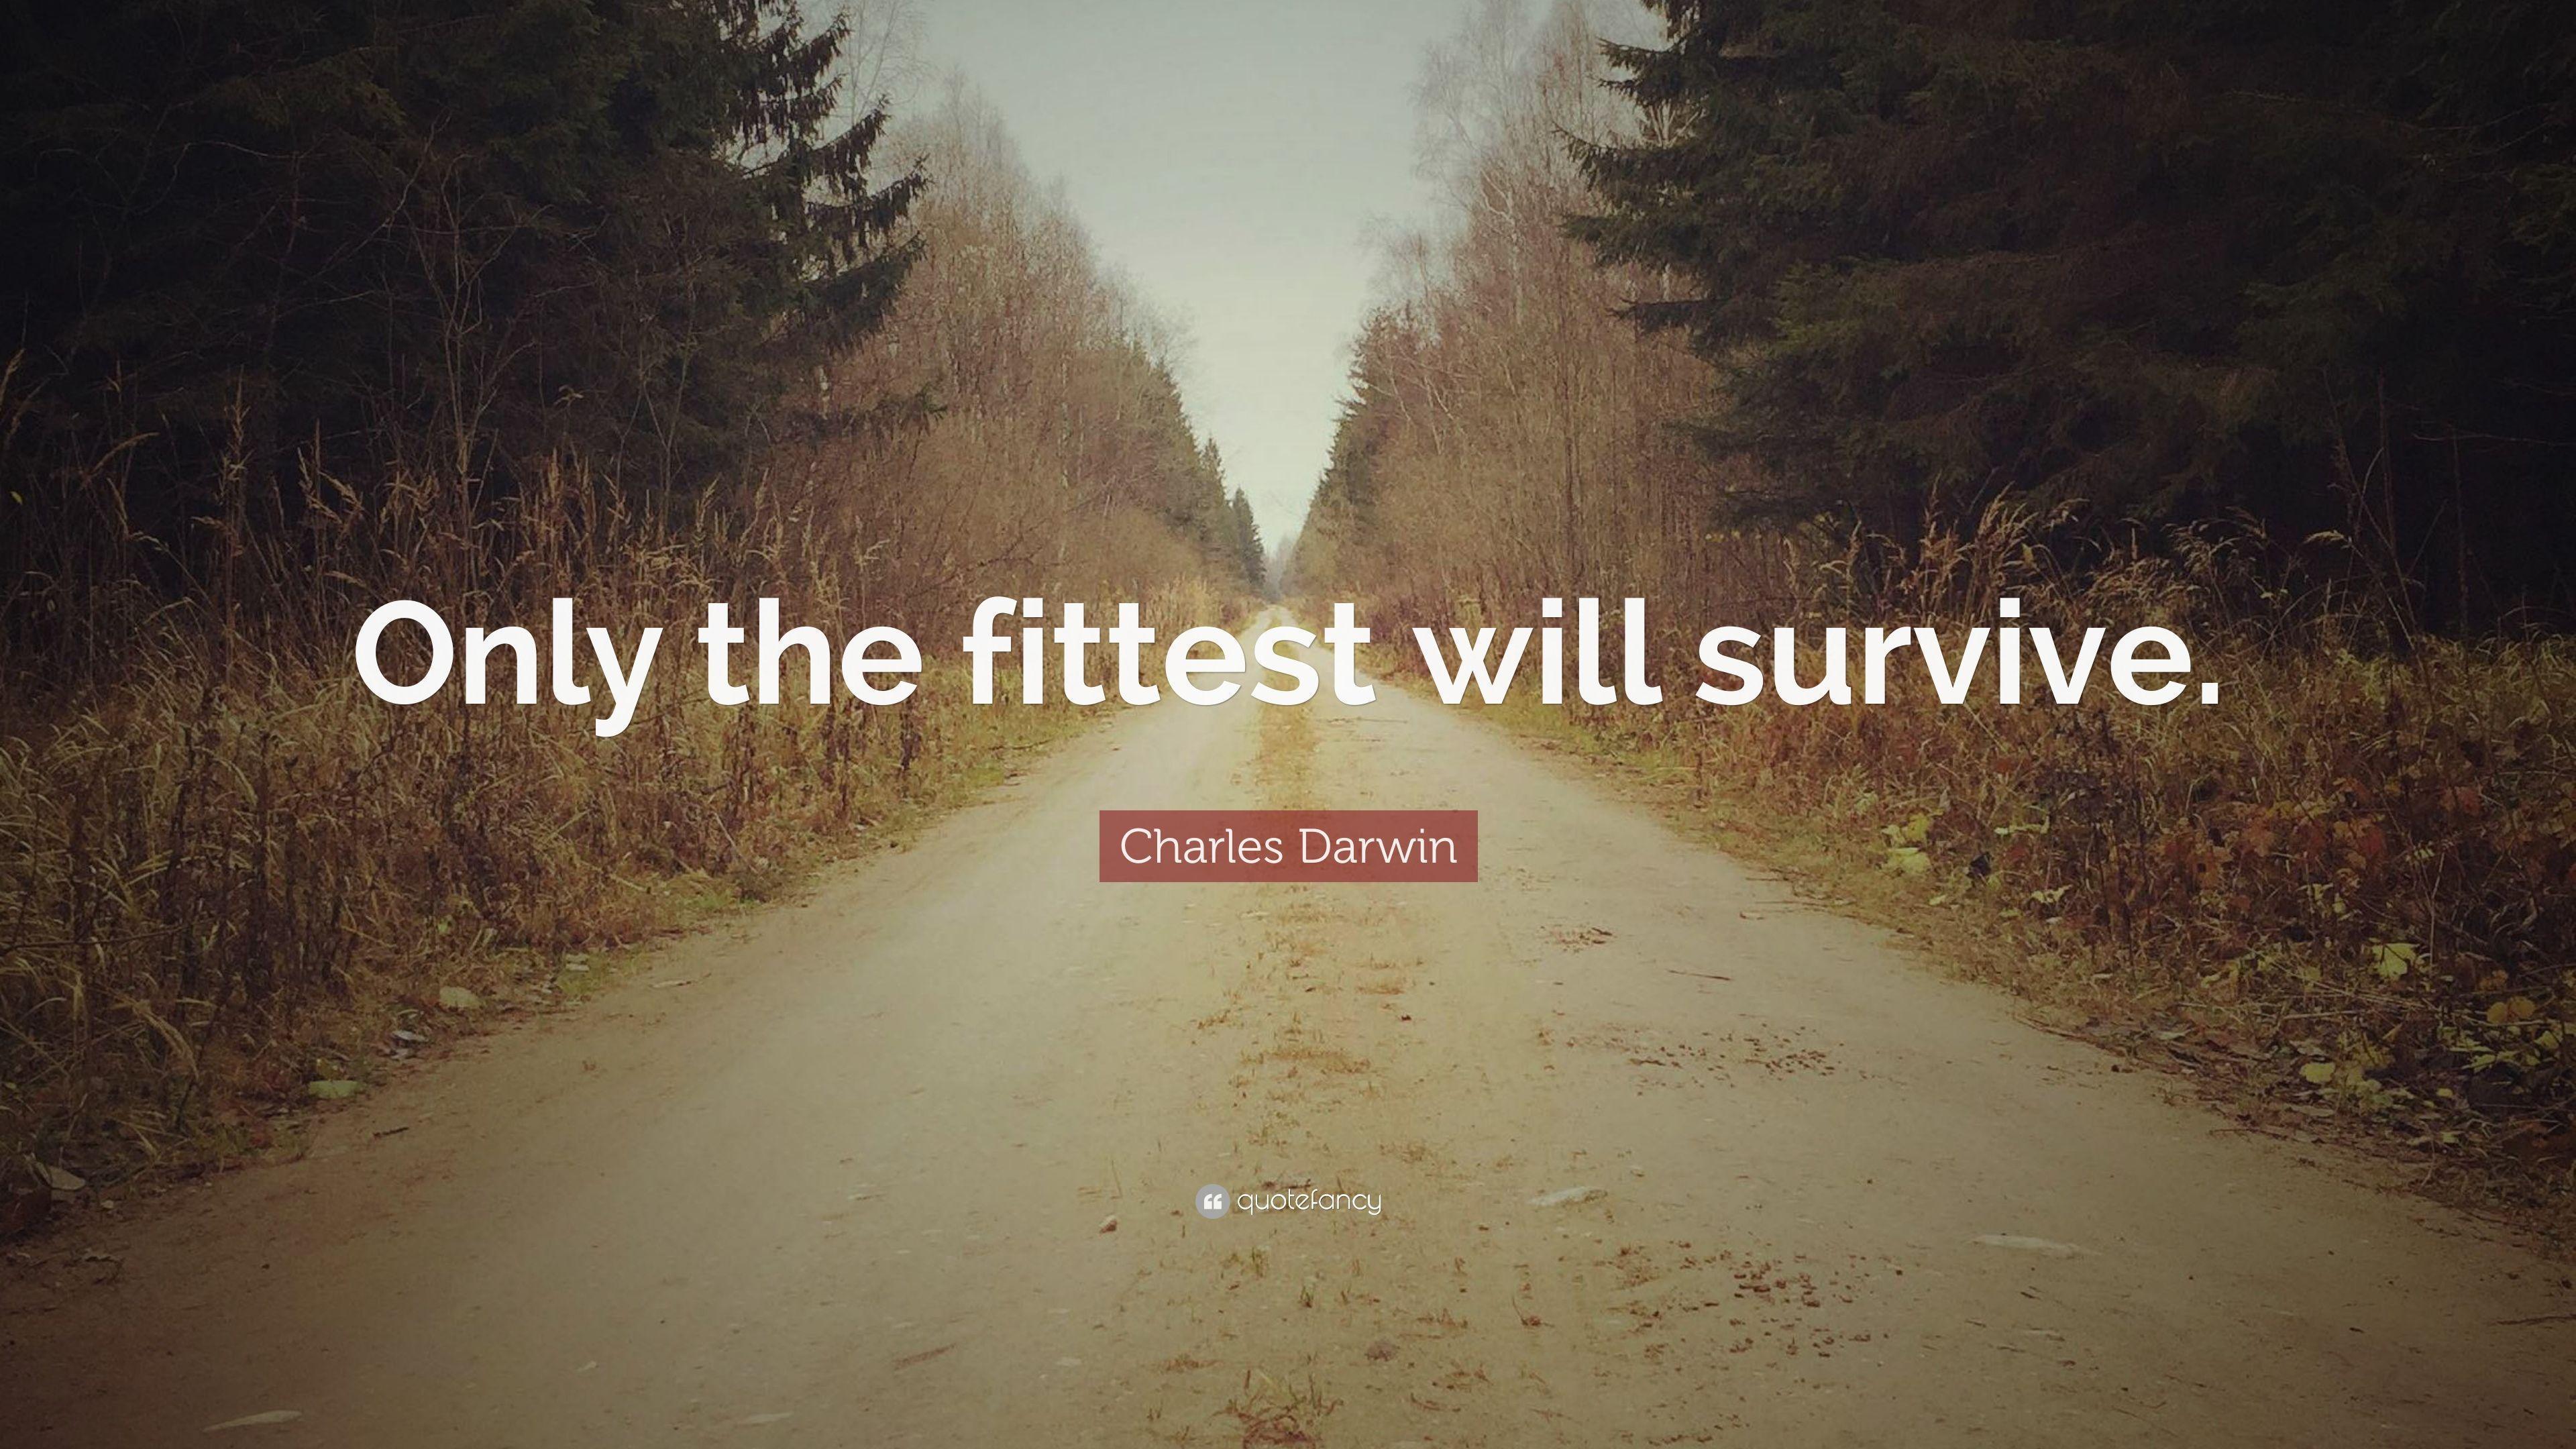 Charles Darwin Quote: “Only the fittest will survive.” 10